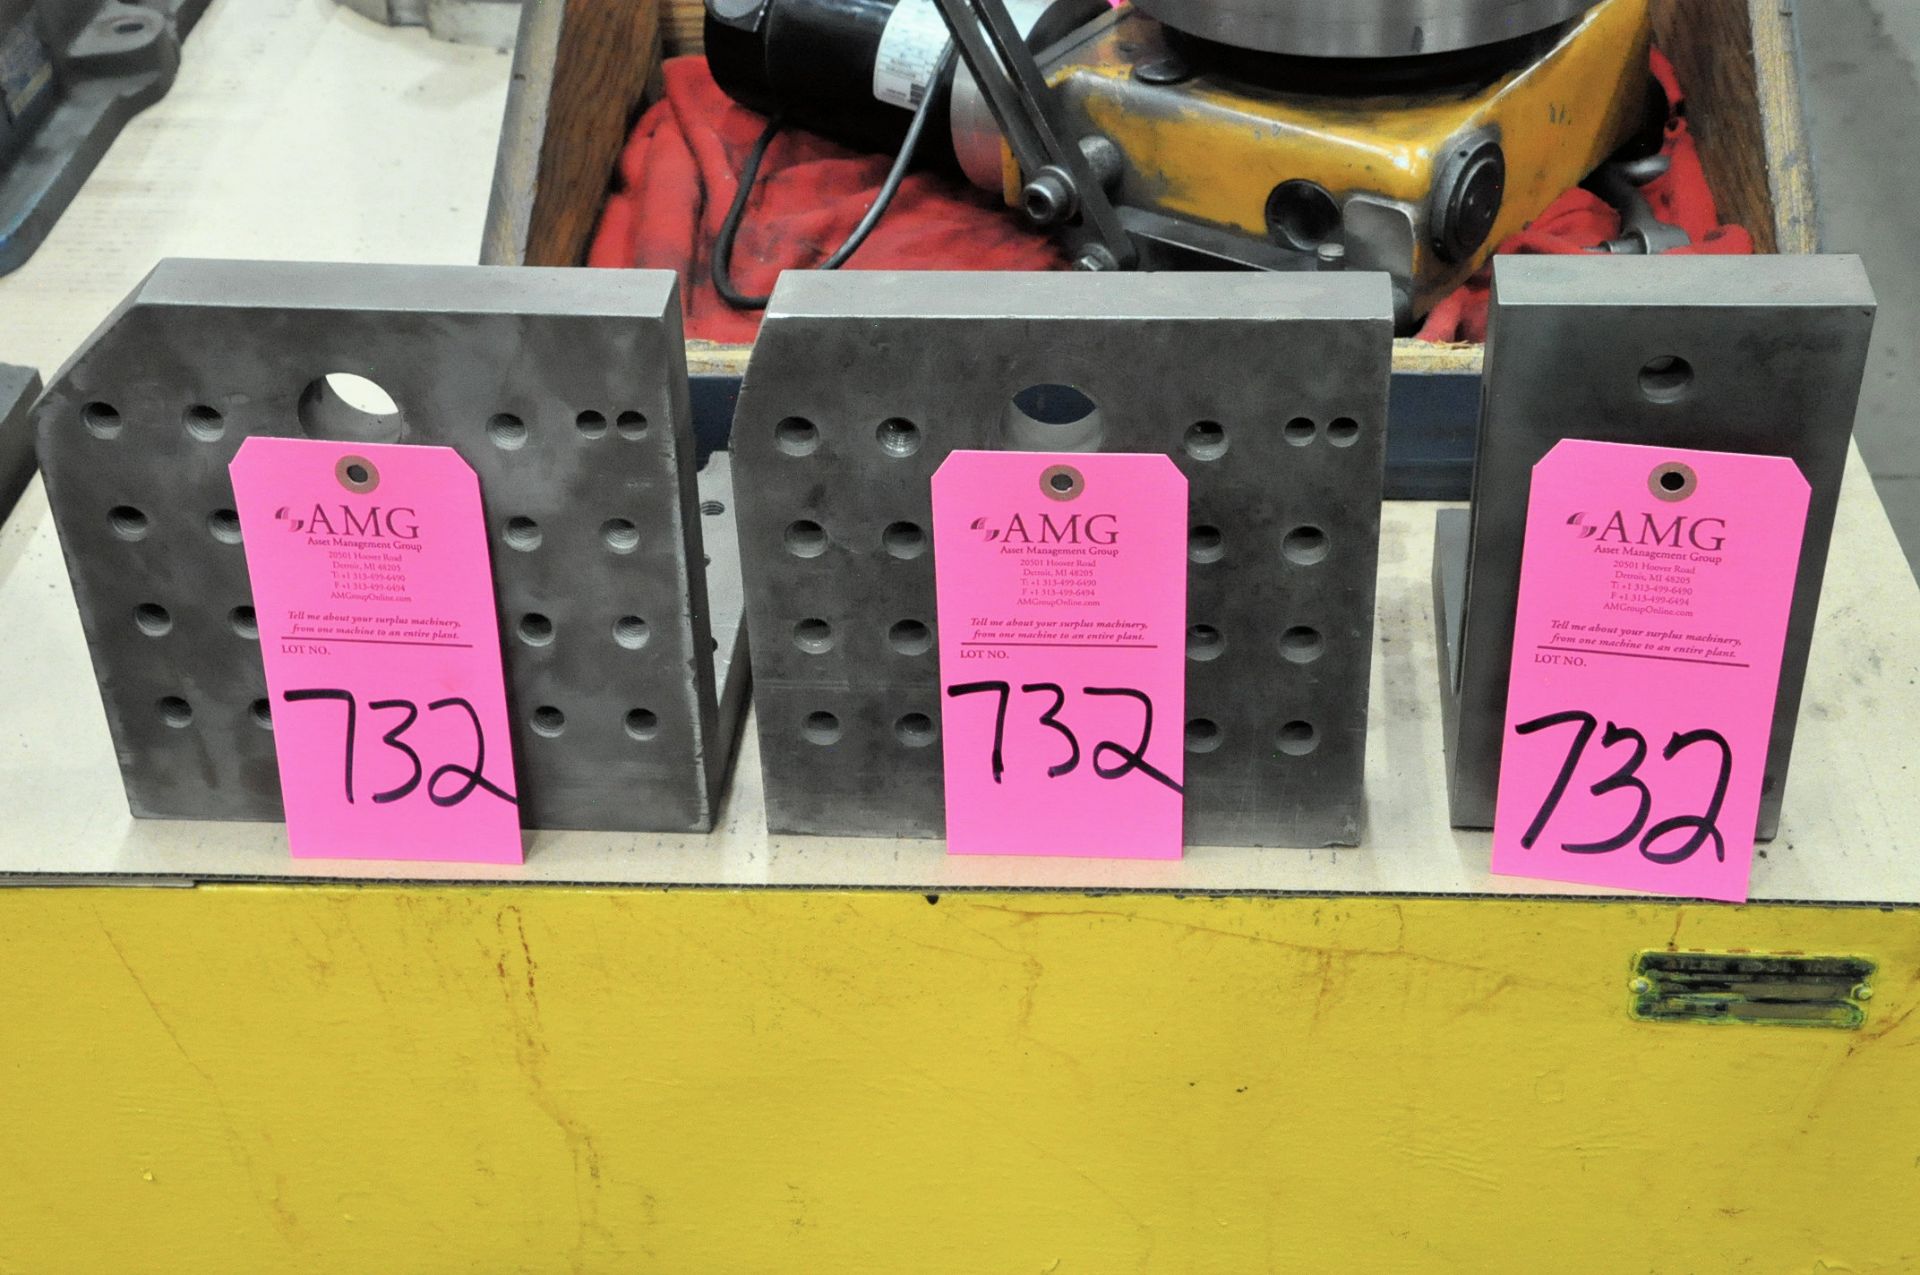 Lot-(3) Drilled and Tapped and (1) Plain Angle Plates, (E-7), (Pink Tag)